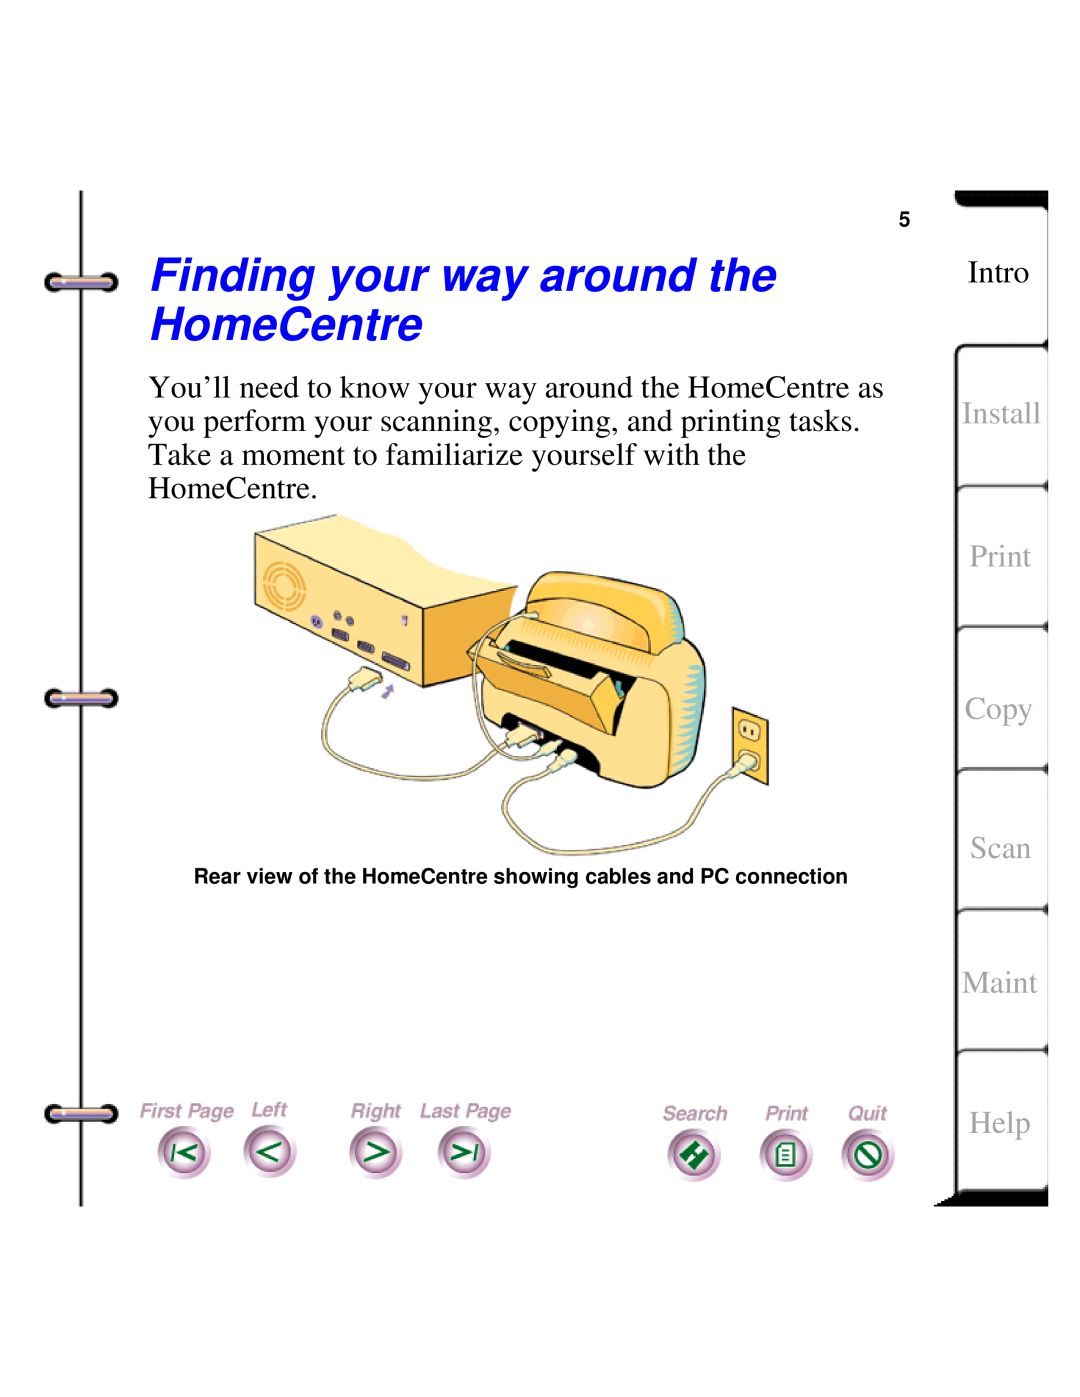 Xerox Document HomeCentre manual Finding your way around the HomeCentre, Install Print, Copy Scan, Maint, Help 